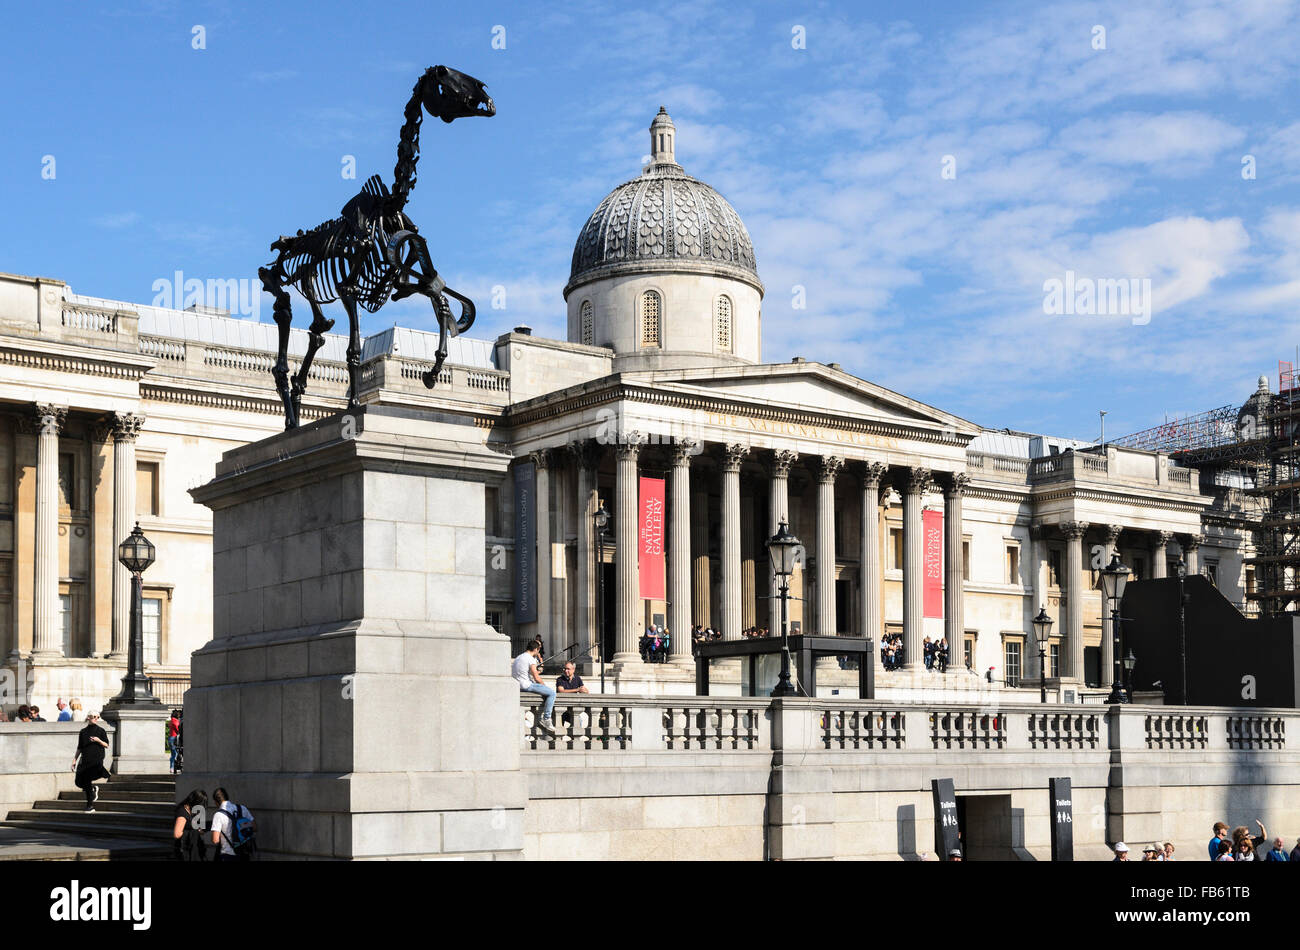 A piece of Sculpture called Gift Horse by Hans Haacke rests upon the Fourth Plinth, Trafalgar Square, London, U.K. Stock Photo